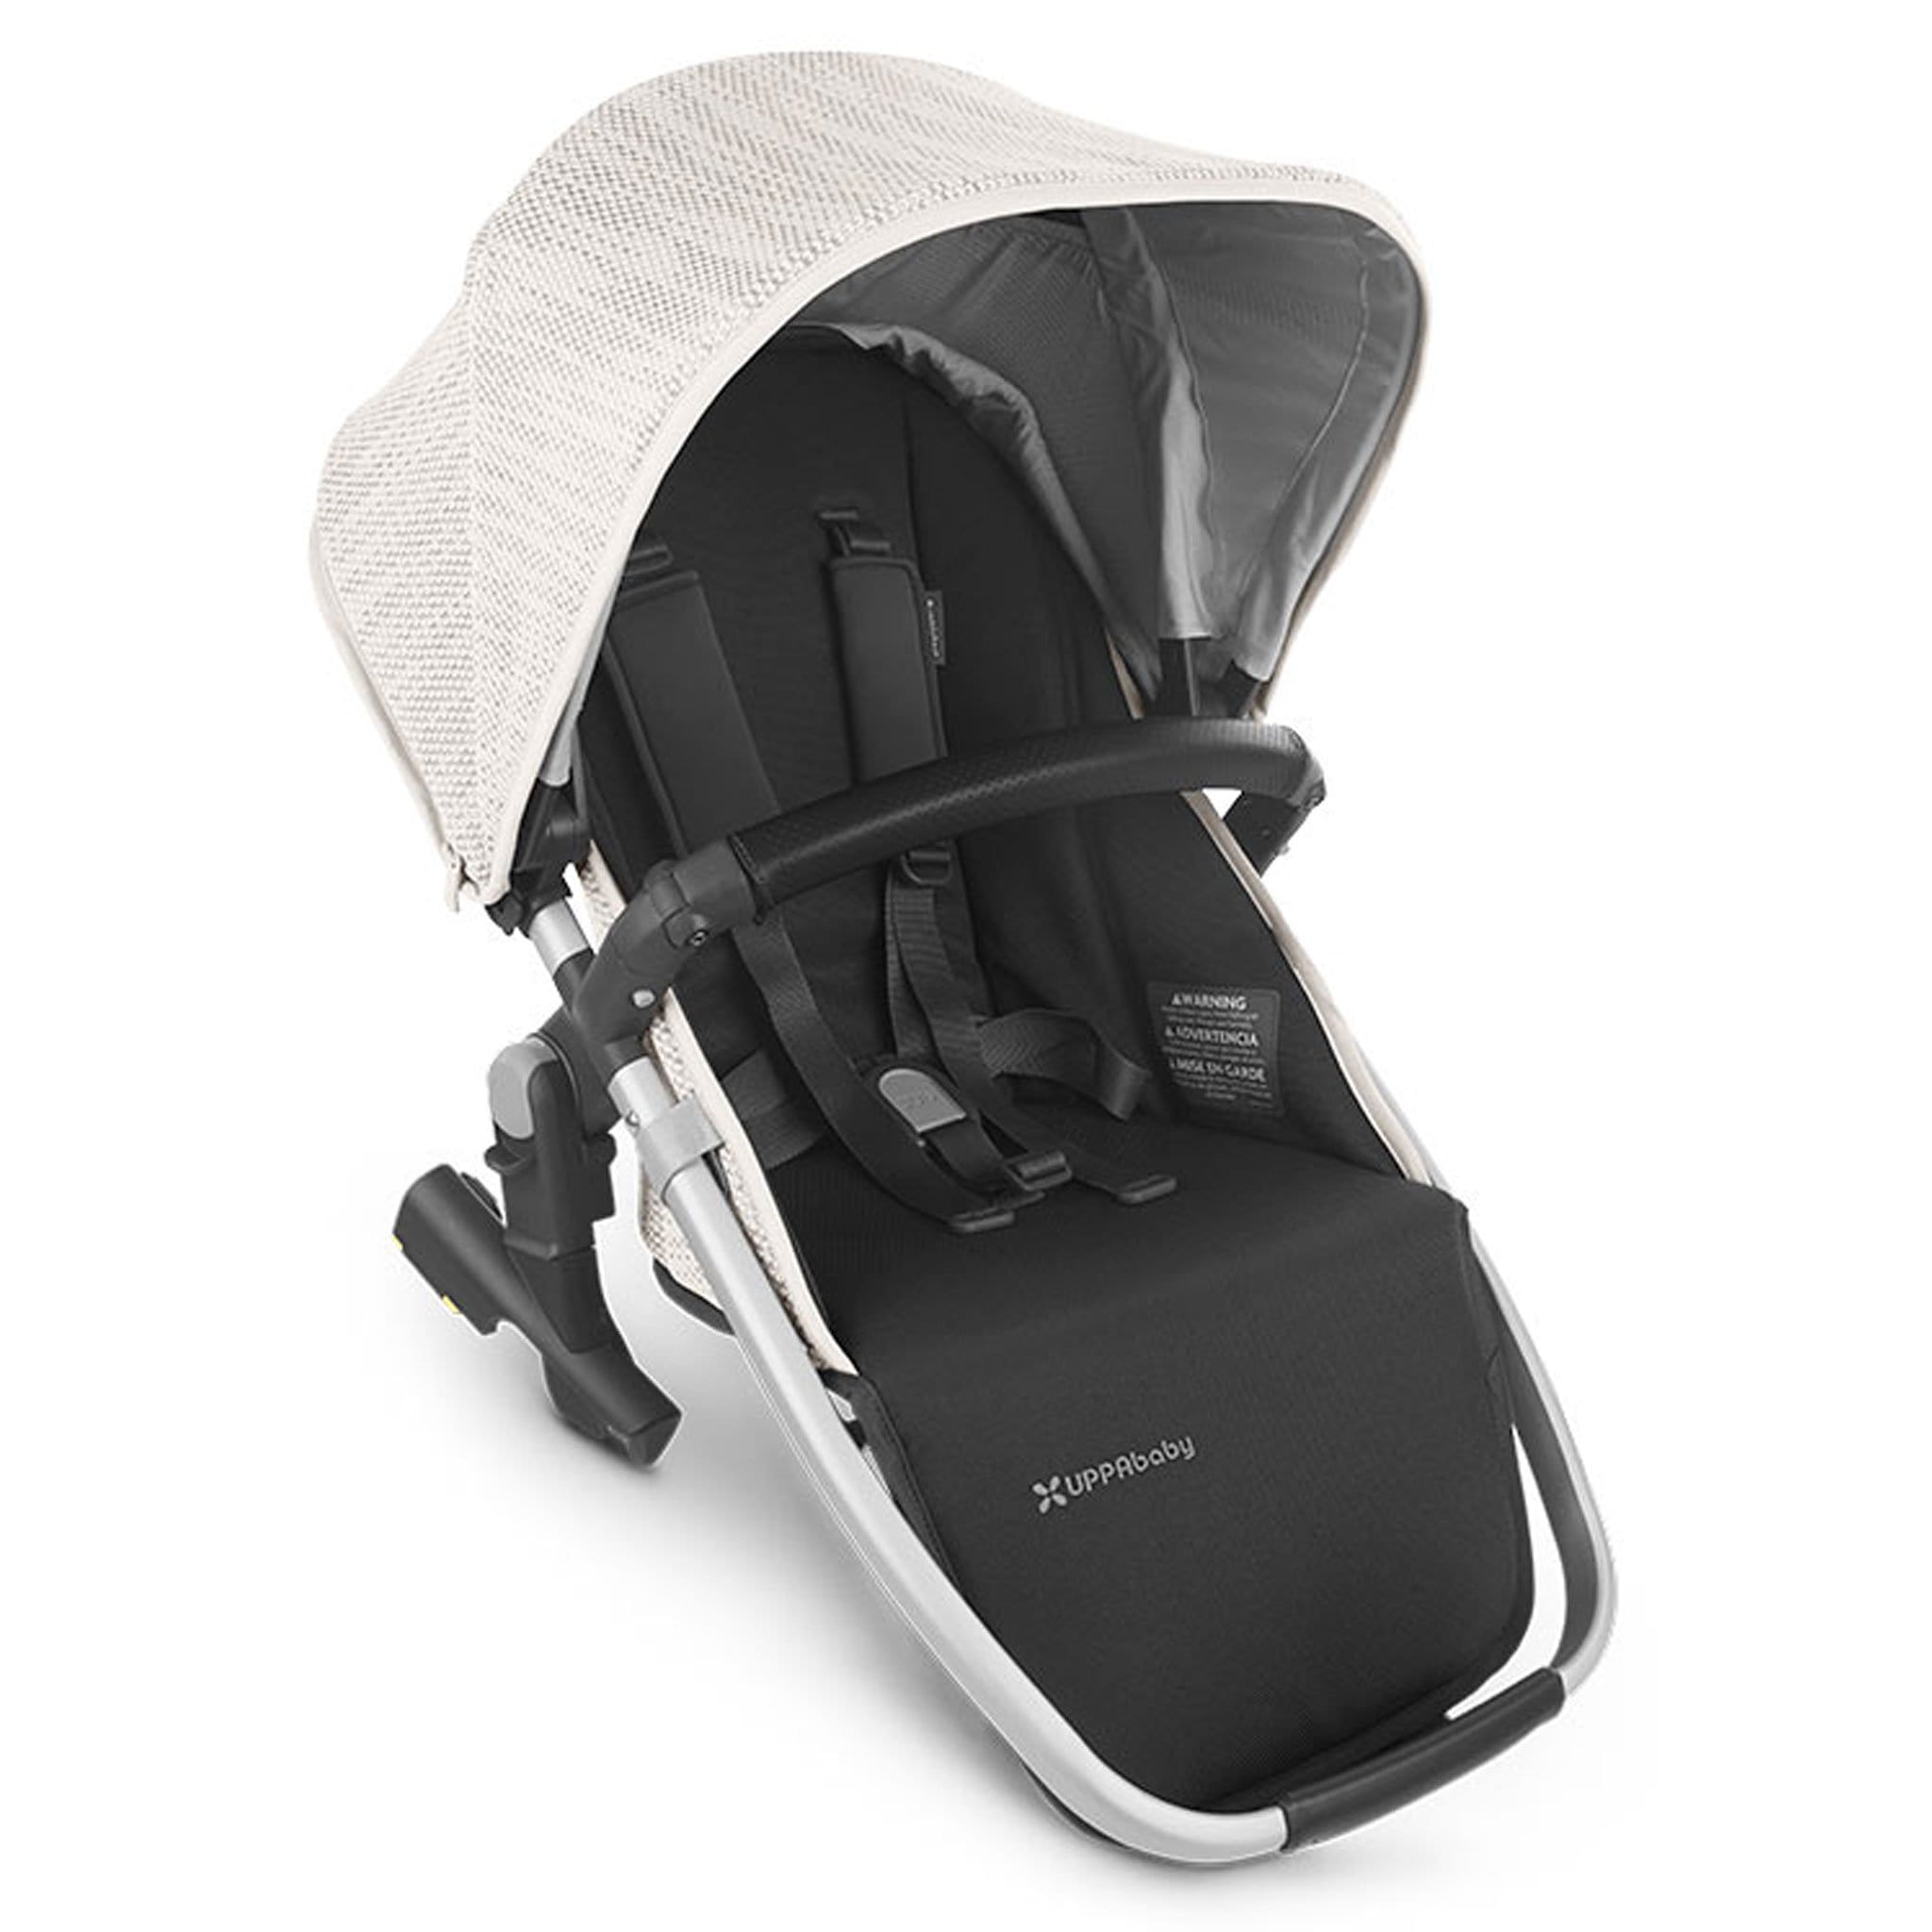 Uppababy buggy accessories UPPAbaby Vista Rumble Seat Sierra 0920-RBS-UK-SRA